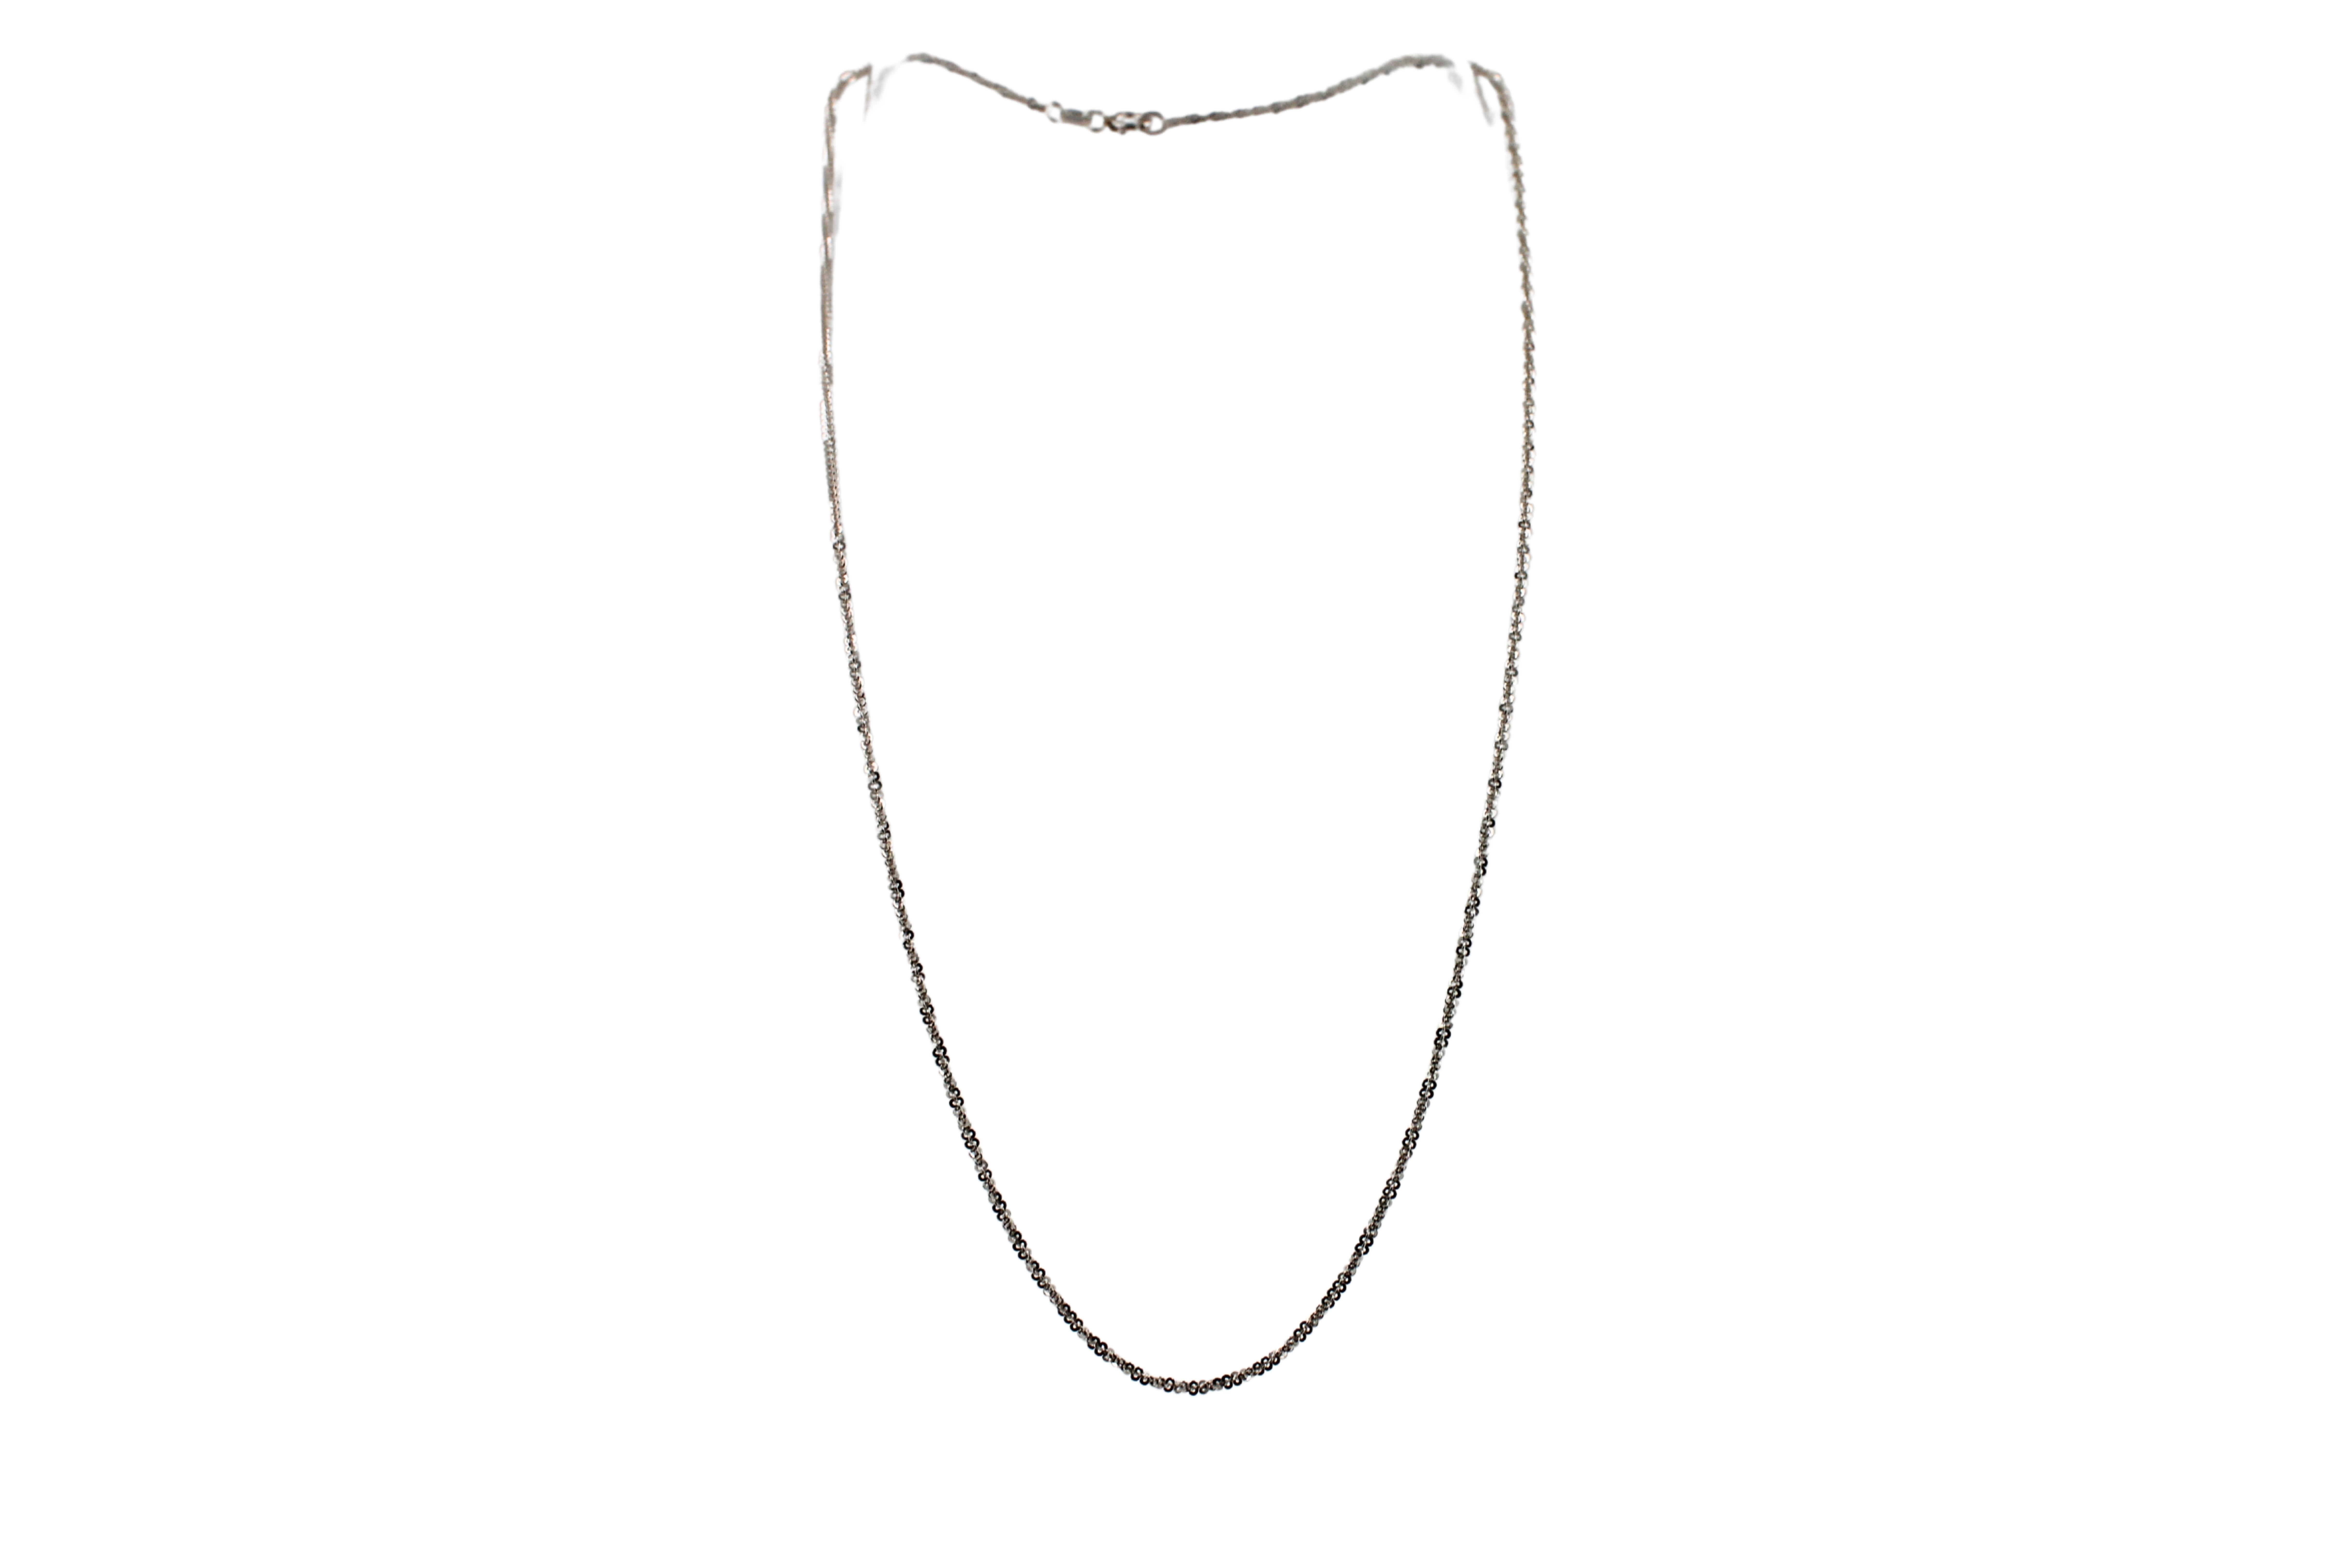 Criss Cross CrissCross Fancy Thin Dainty Link 925 Sterling Silver Chain Necklace
•	1.90 Grams
•	16 Inches
•	1 mm width
•	White Rhodium Plate Finish
